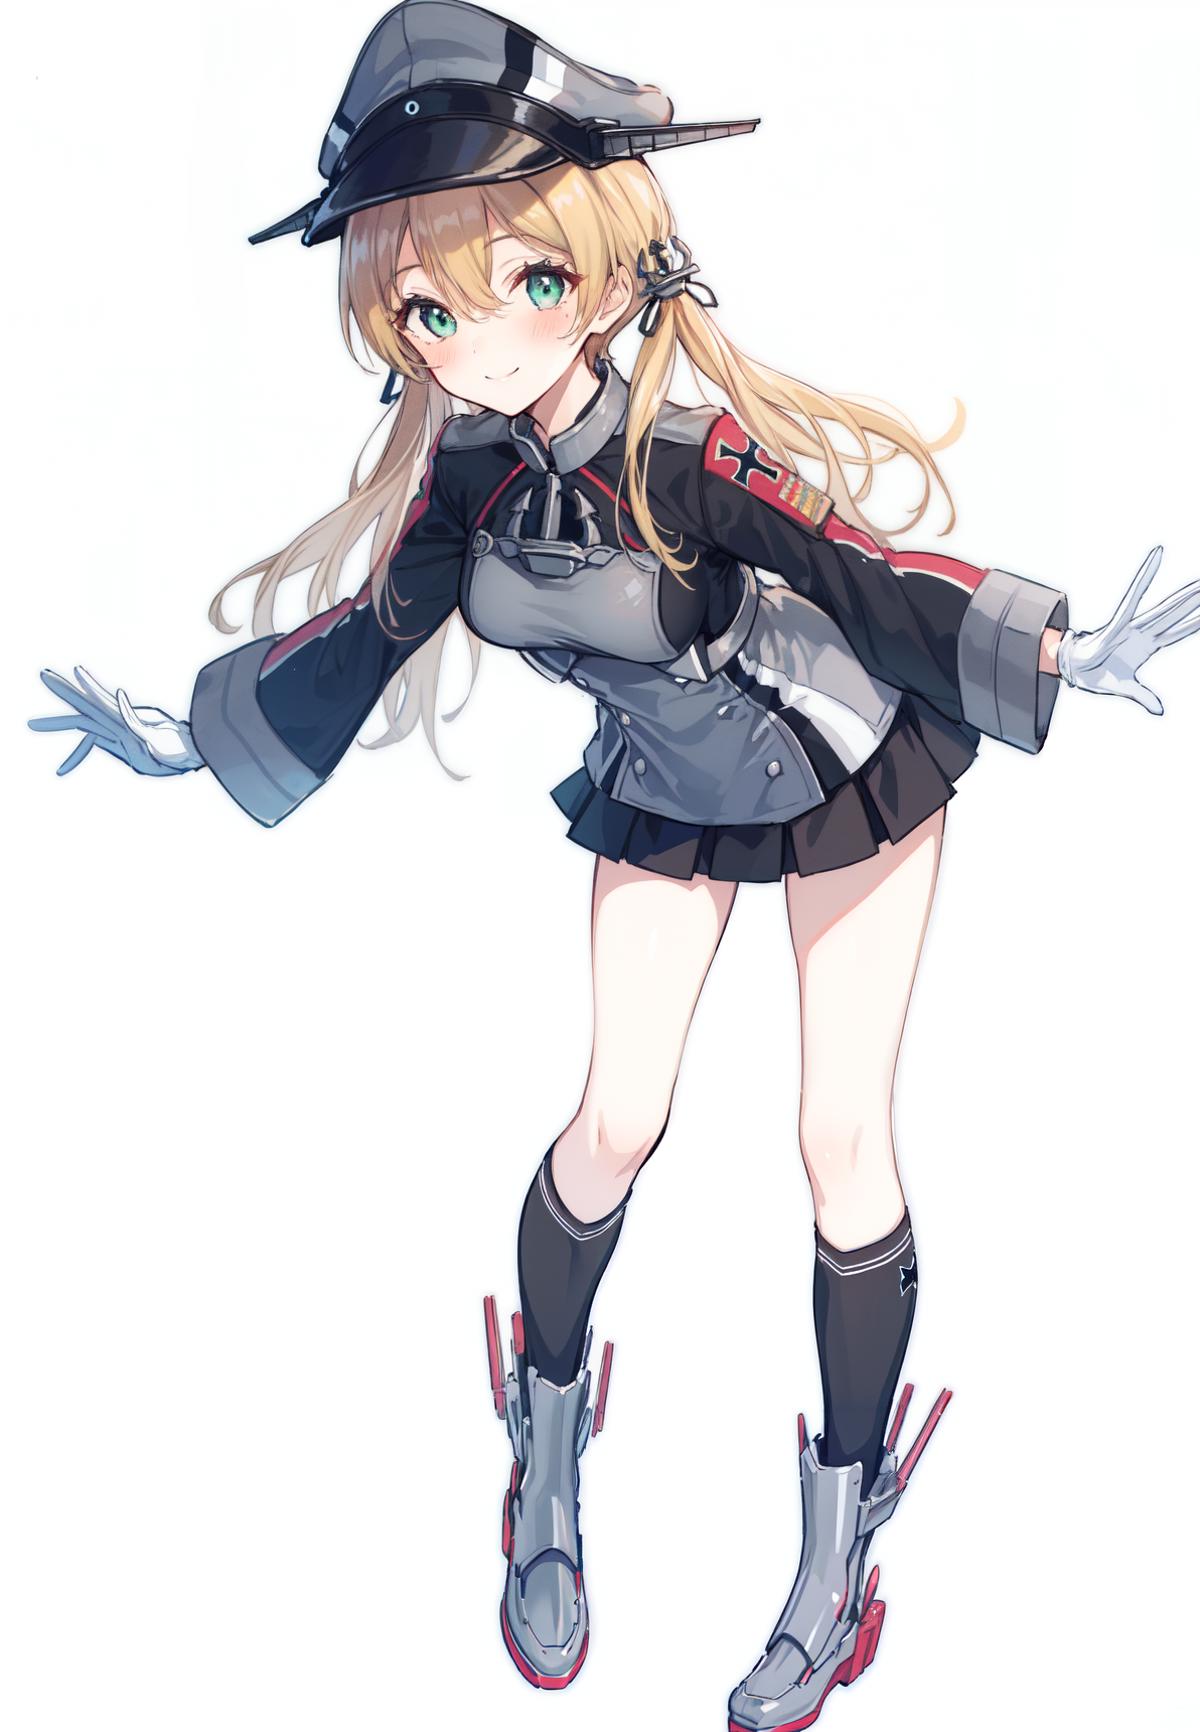 Prinz Eugen (Kancolle) image by sola0929